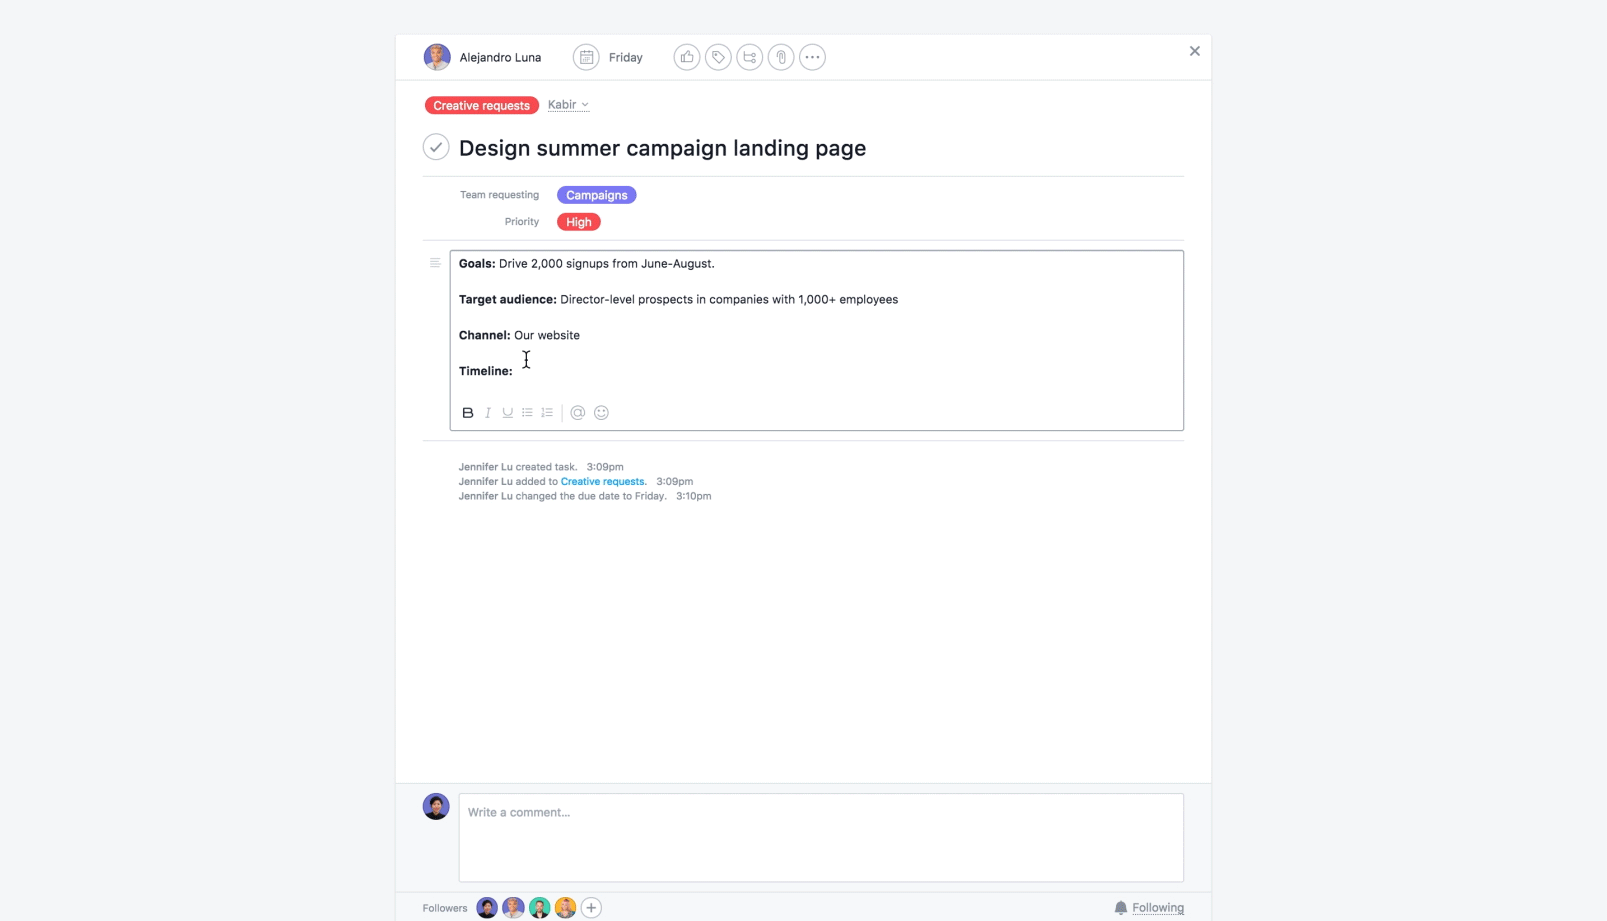 How to format text and add emojis in Asana descriptions